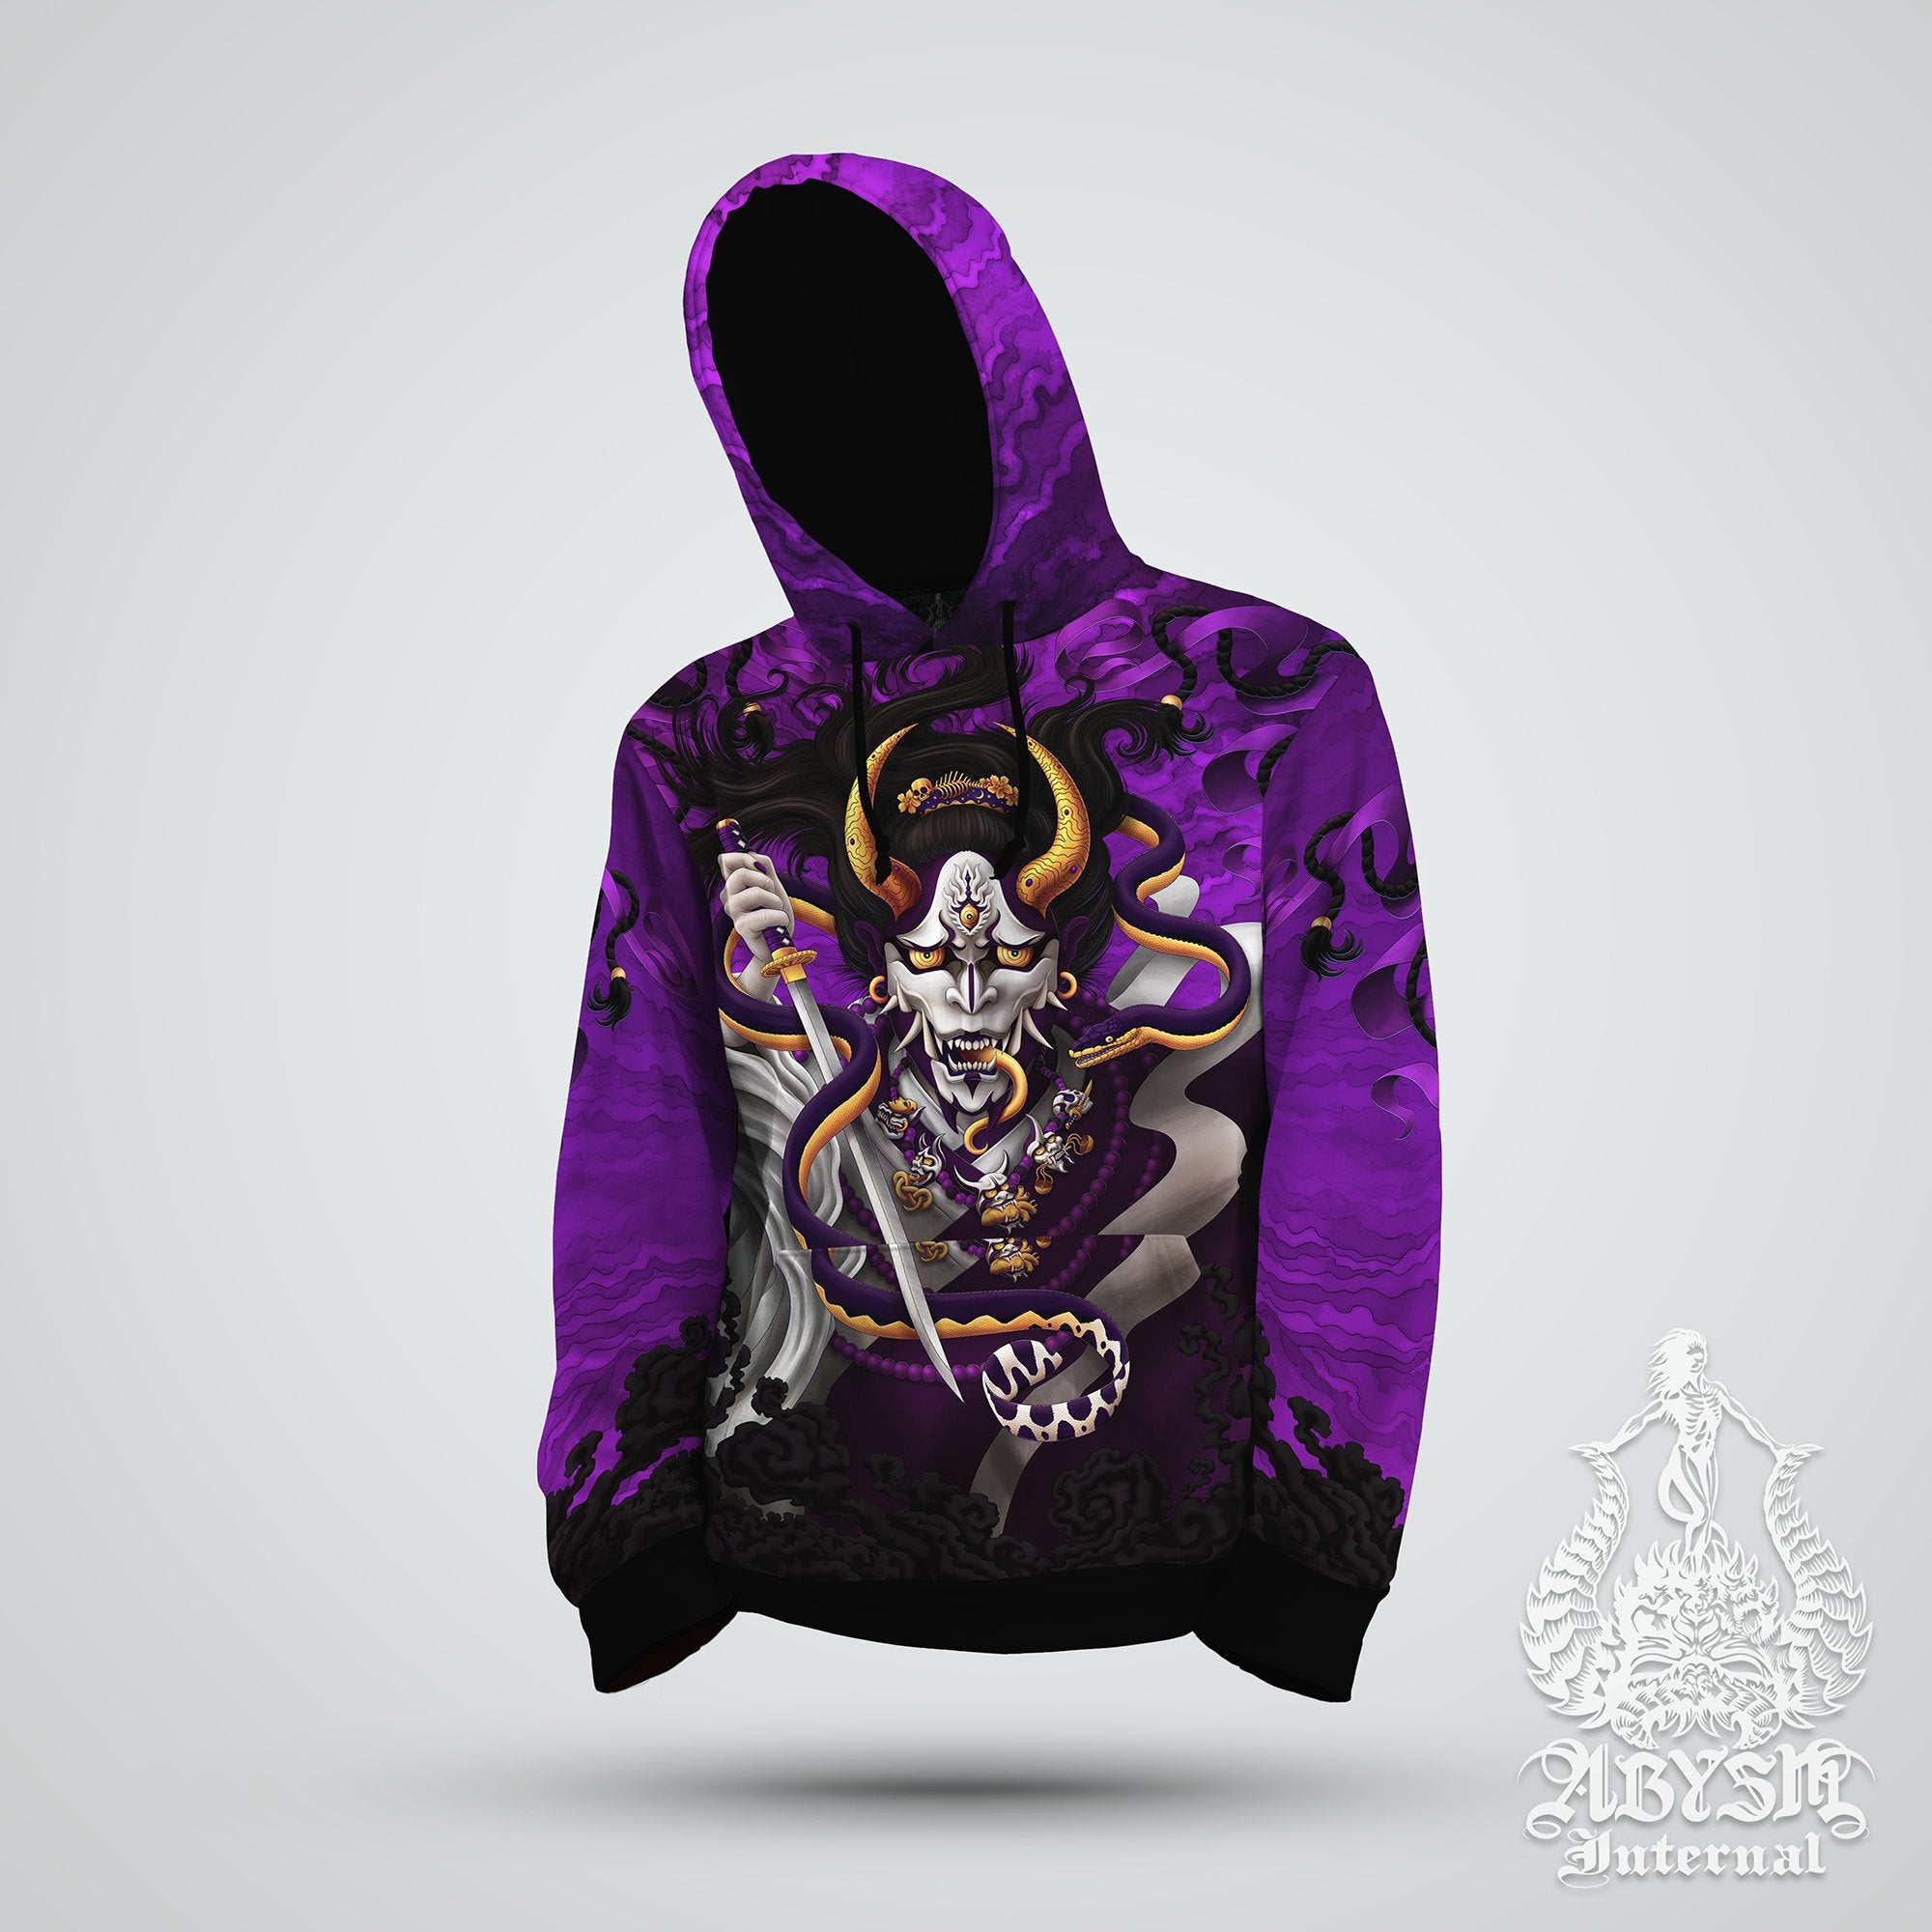 Skater Hoodie, Hannya Sweater, Anime and Manga Streetwear, Fantasy Street Outfit, Japanese Demon Pullover, Alternative Clothing, Unisex - Oni and Snake, White Goth Purple - Abysm Internal